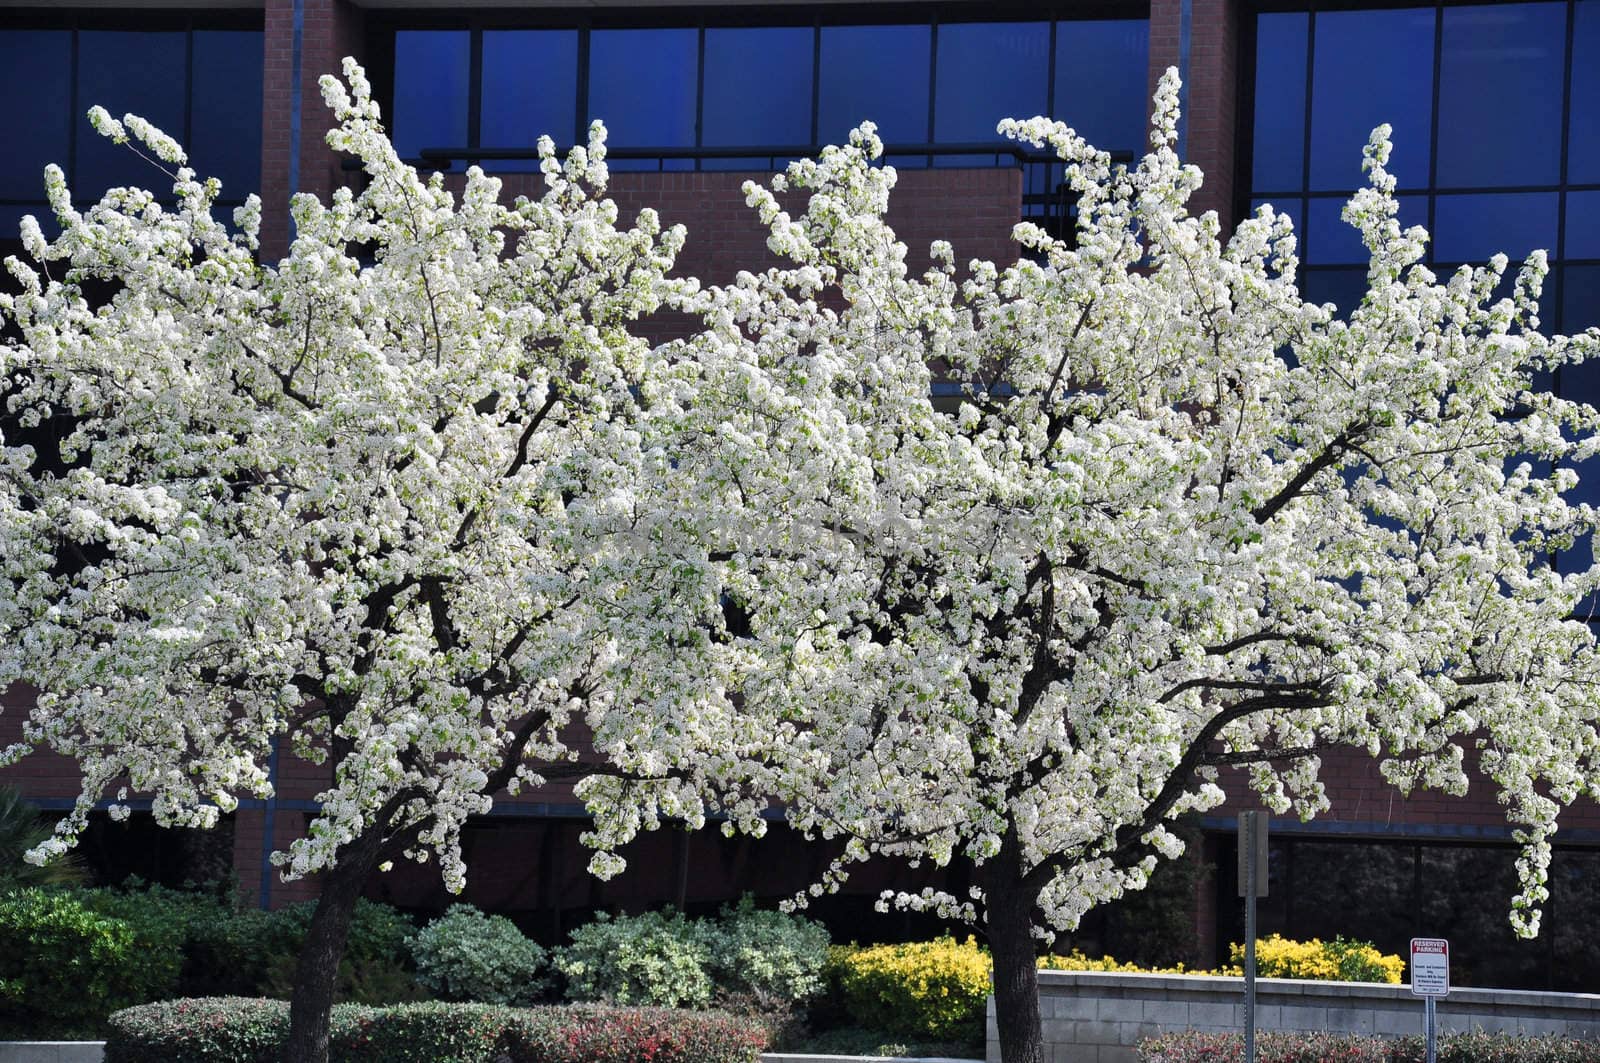 Trees are in full bloom with white blossoms in Temecula, California.